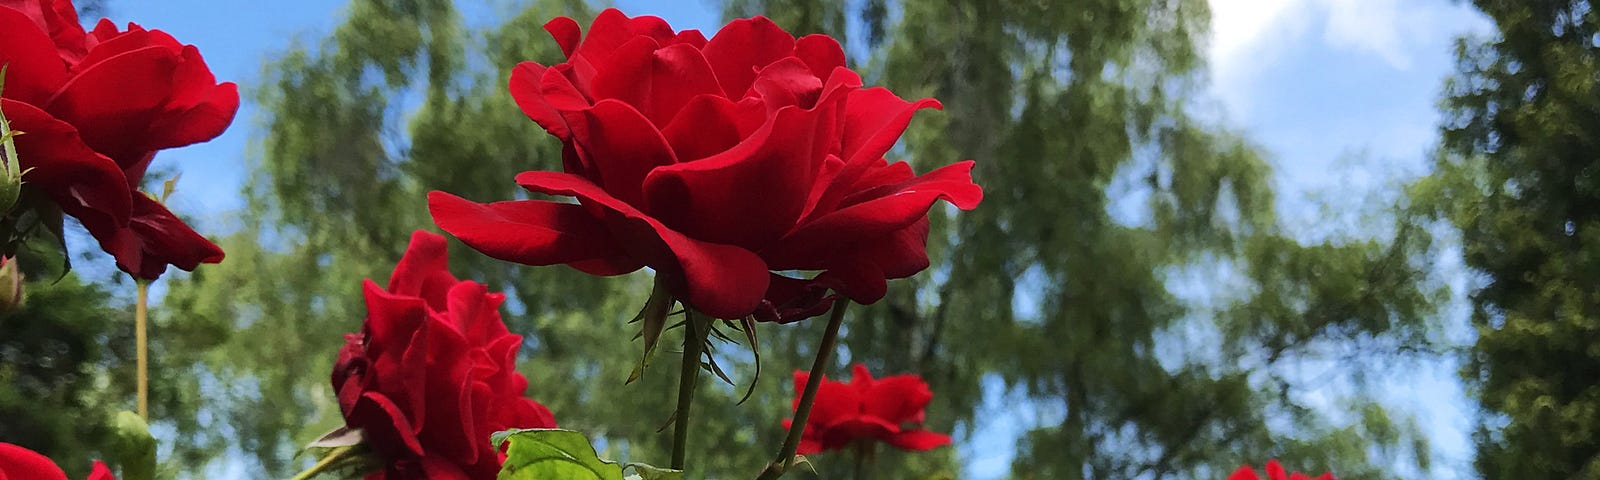 Red roses in the graveyard